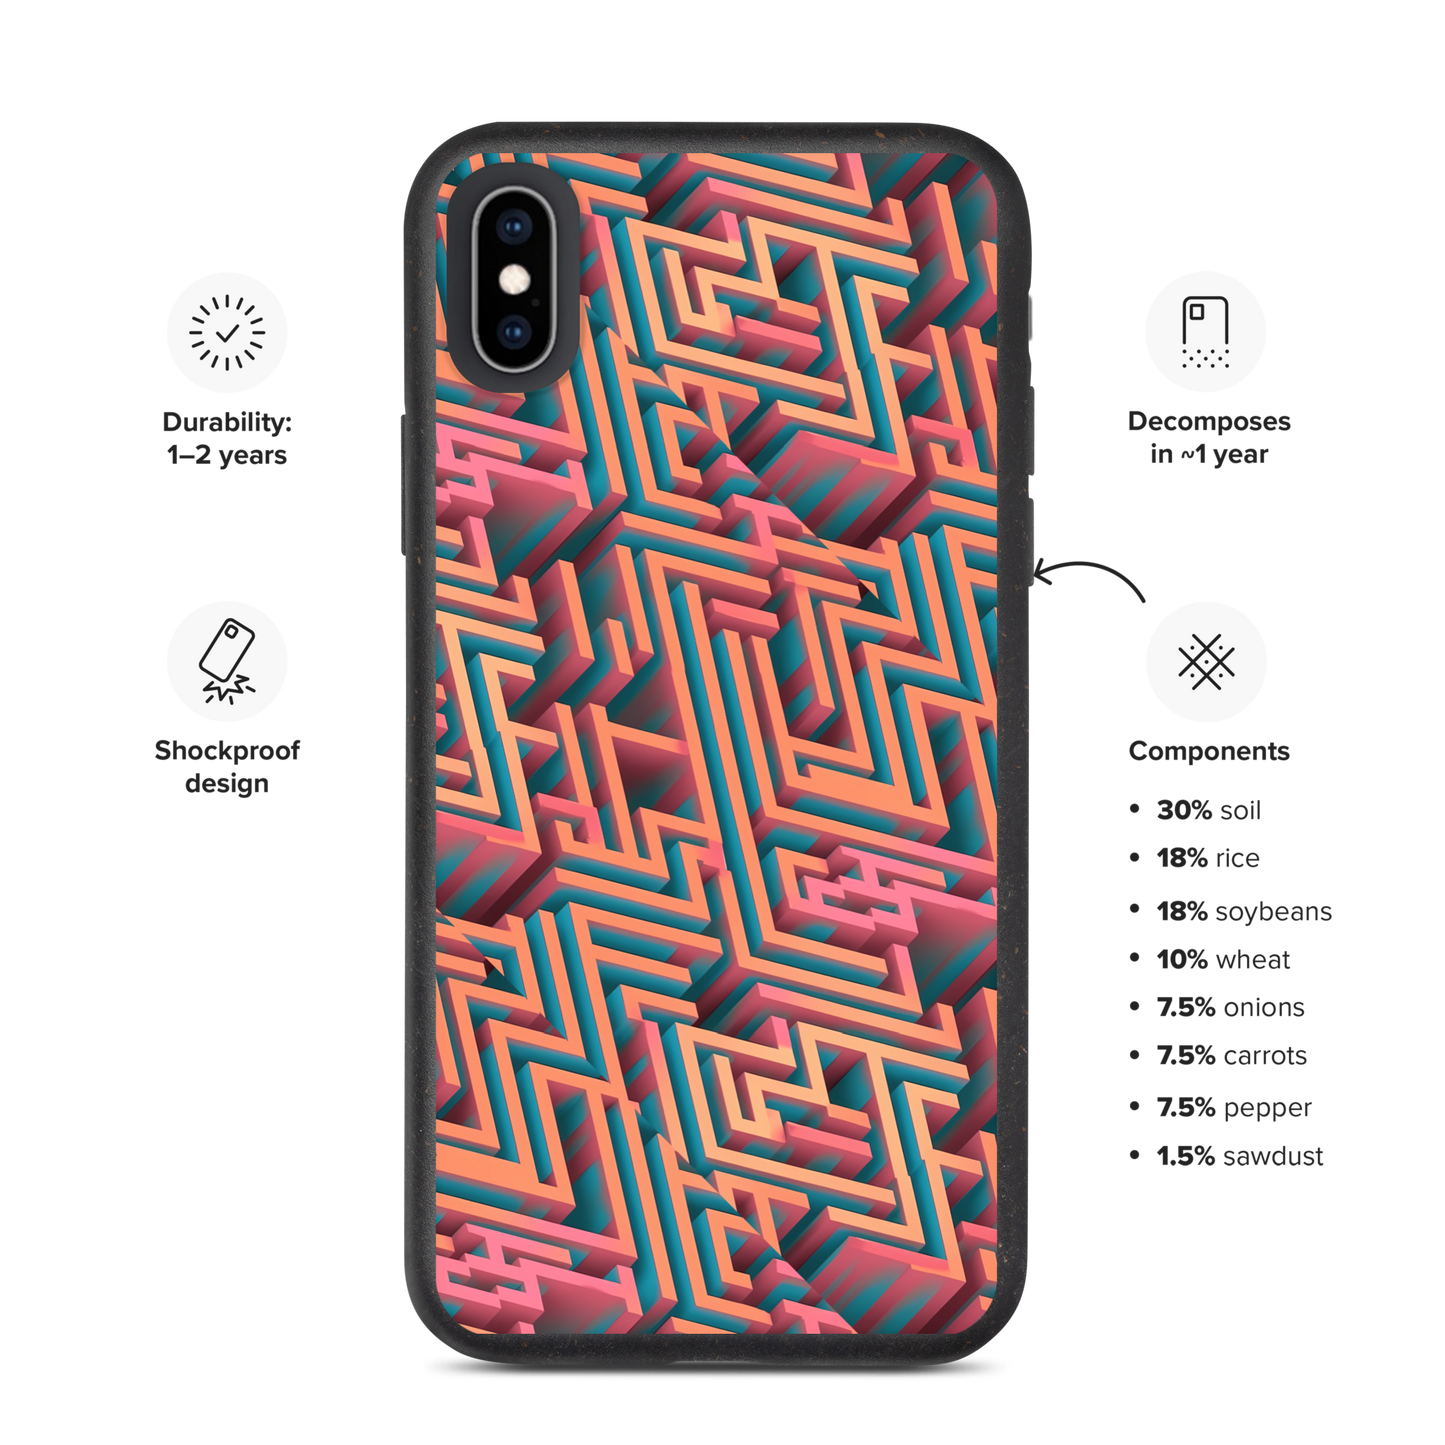 3D Maze Illusion | 3D Patterns | Speckled Case for iPhone - #1